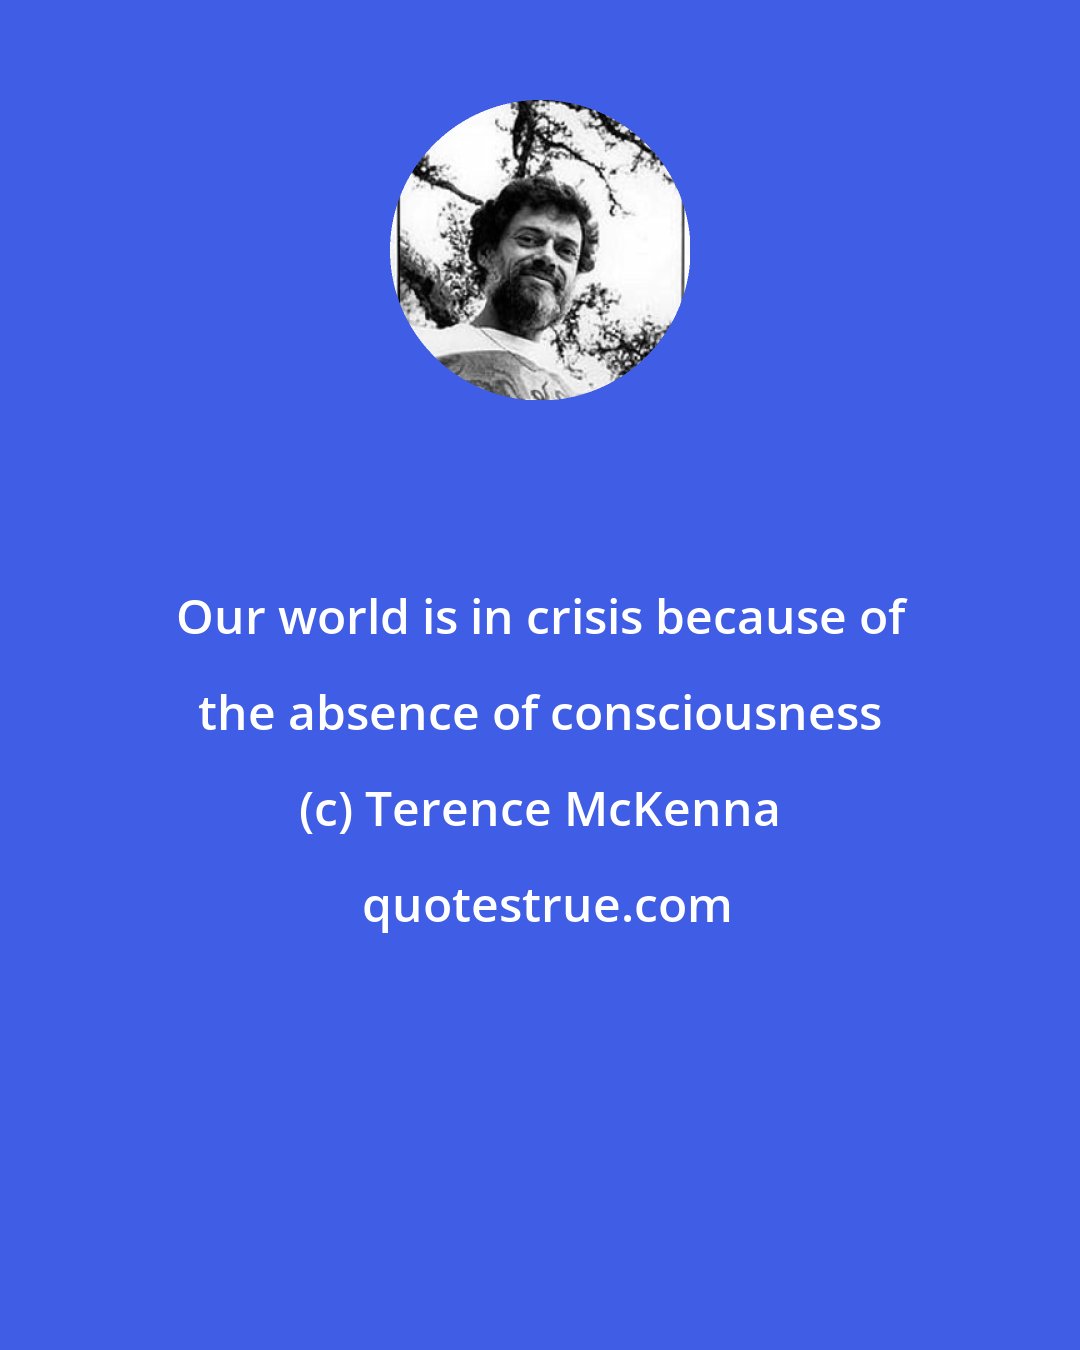 Terence McKenna: Our world is in crisis because of the absence of consciousness